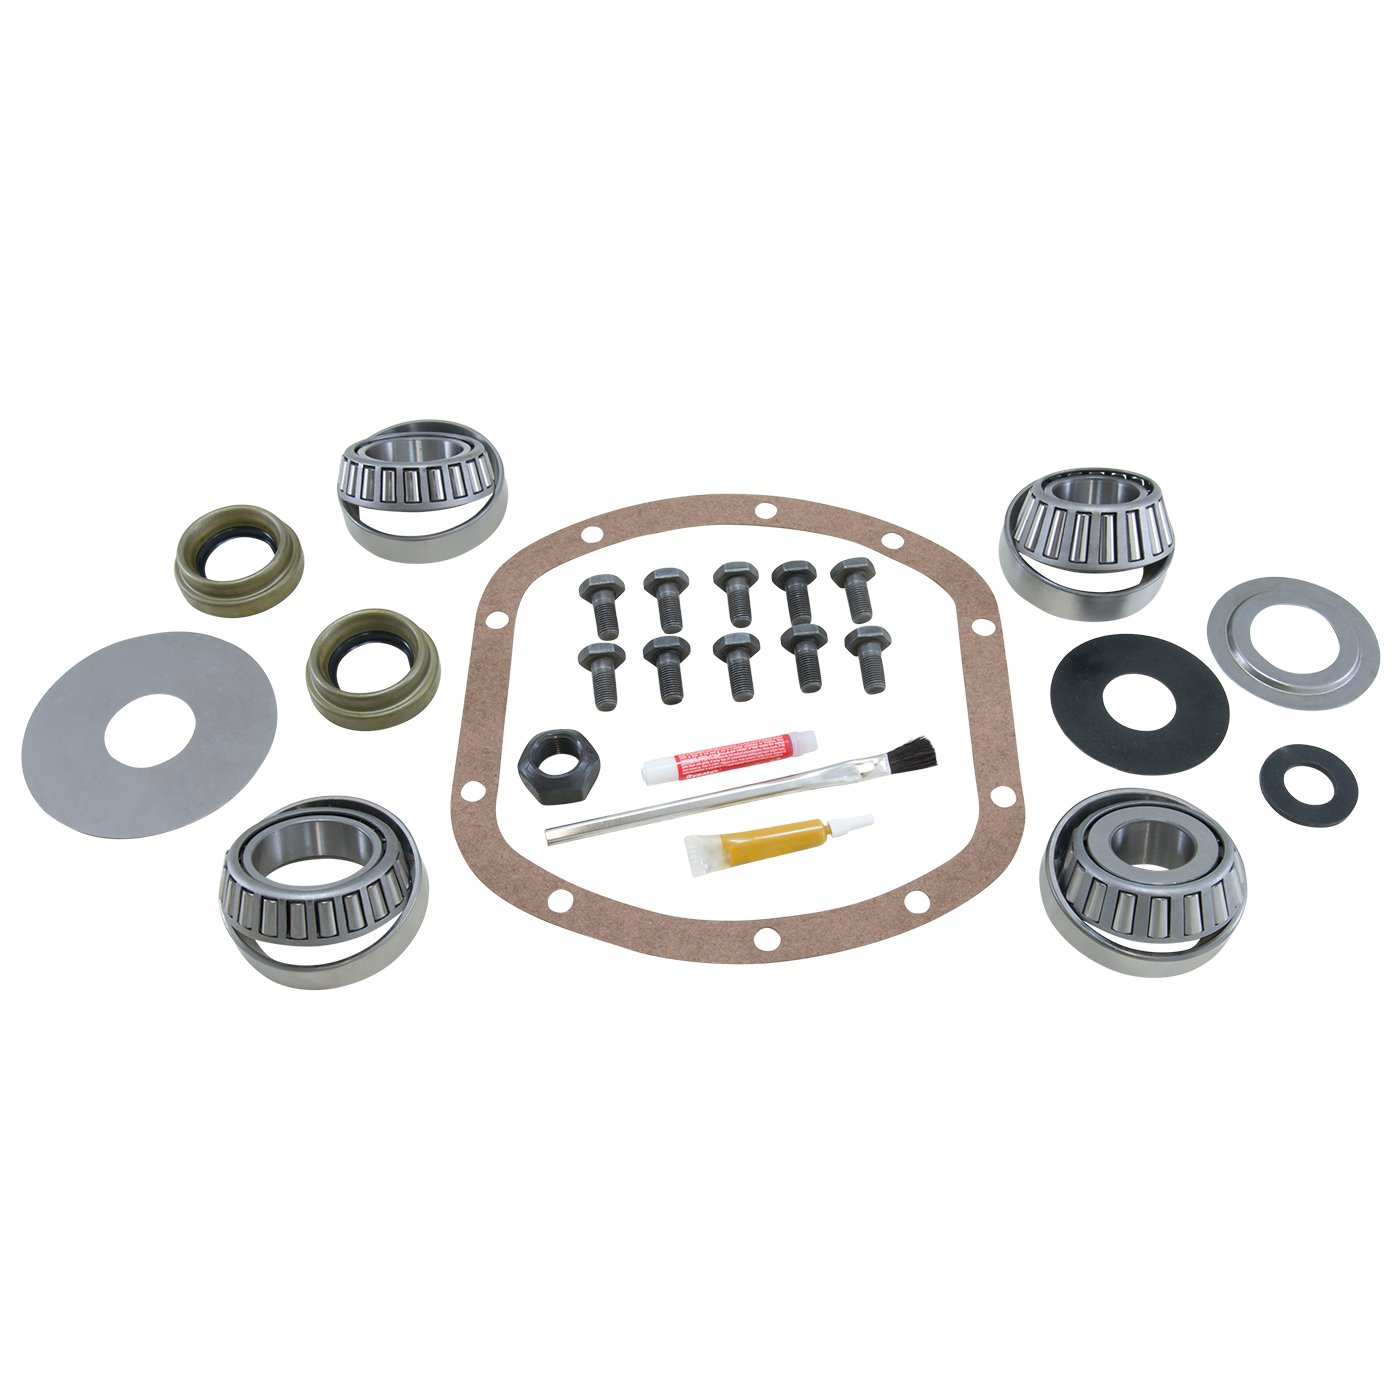 USA Standard ZK D30-F Master Overhaul Kit, For Dana 30 Front Differential Without C-Sleeve